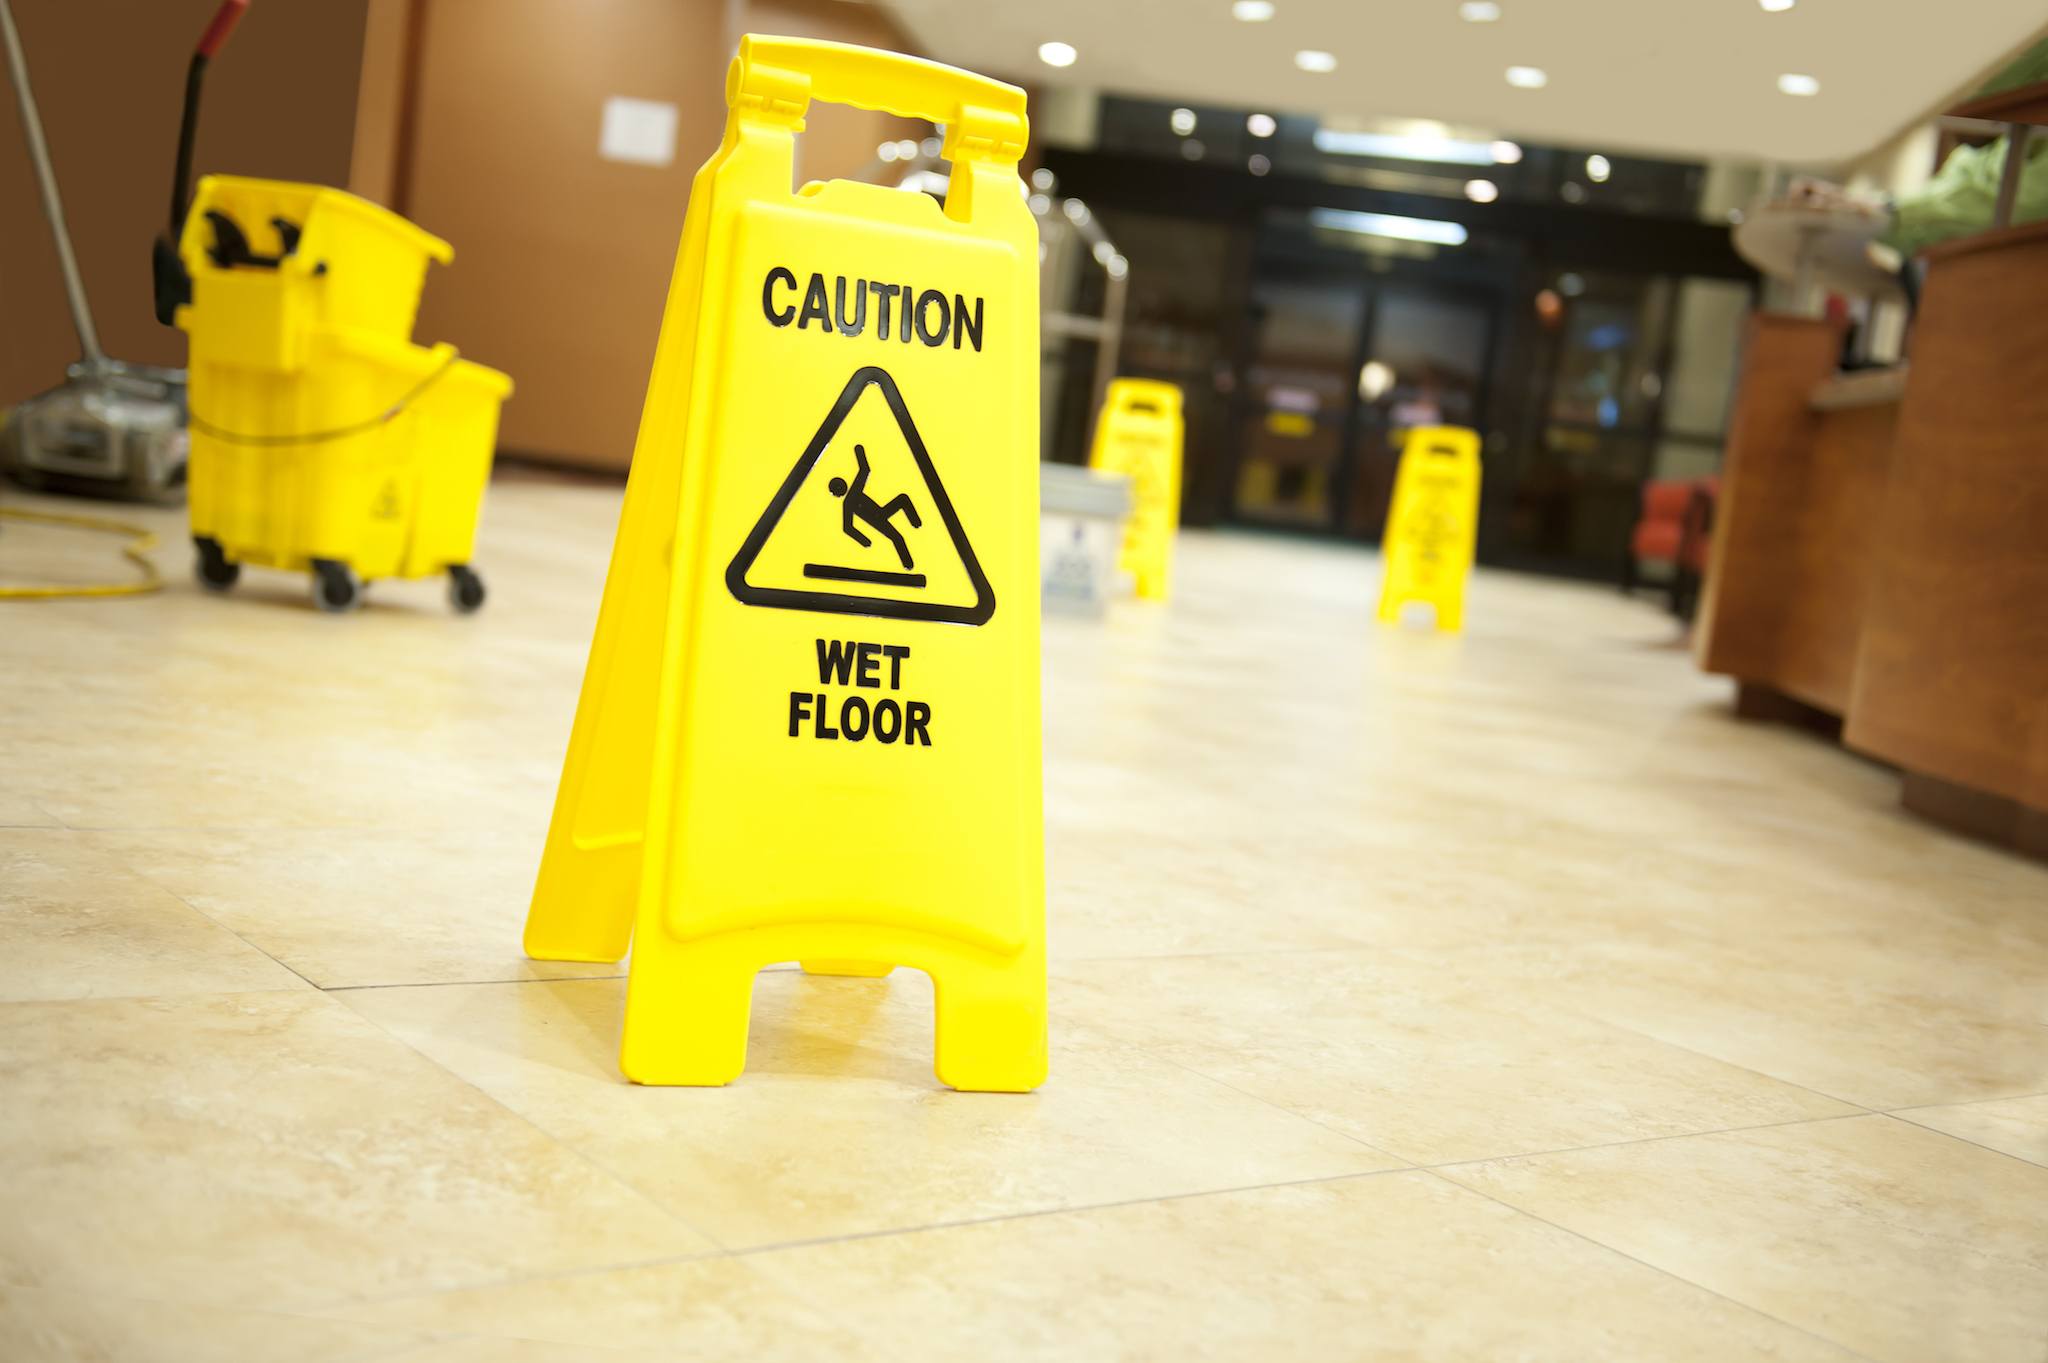 How to prevent slips trips and falls in the kitchen Slips Trips And Falls Safeme Safety In The Workplace